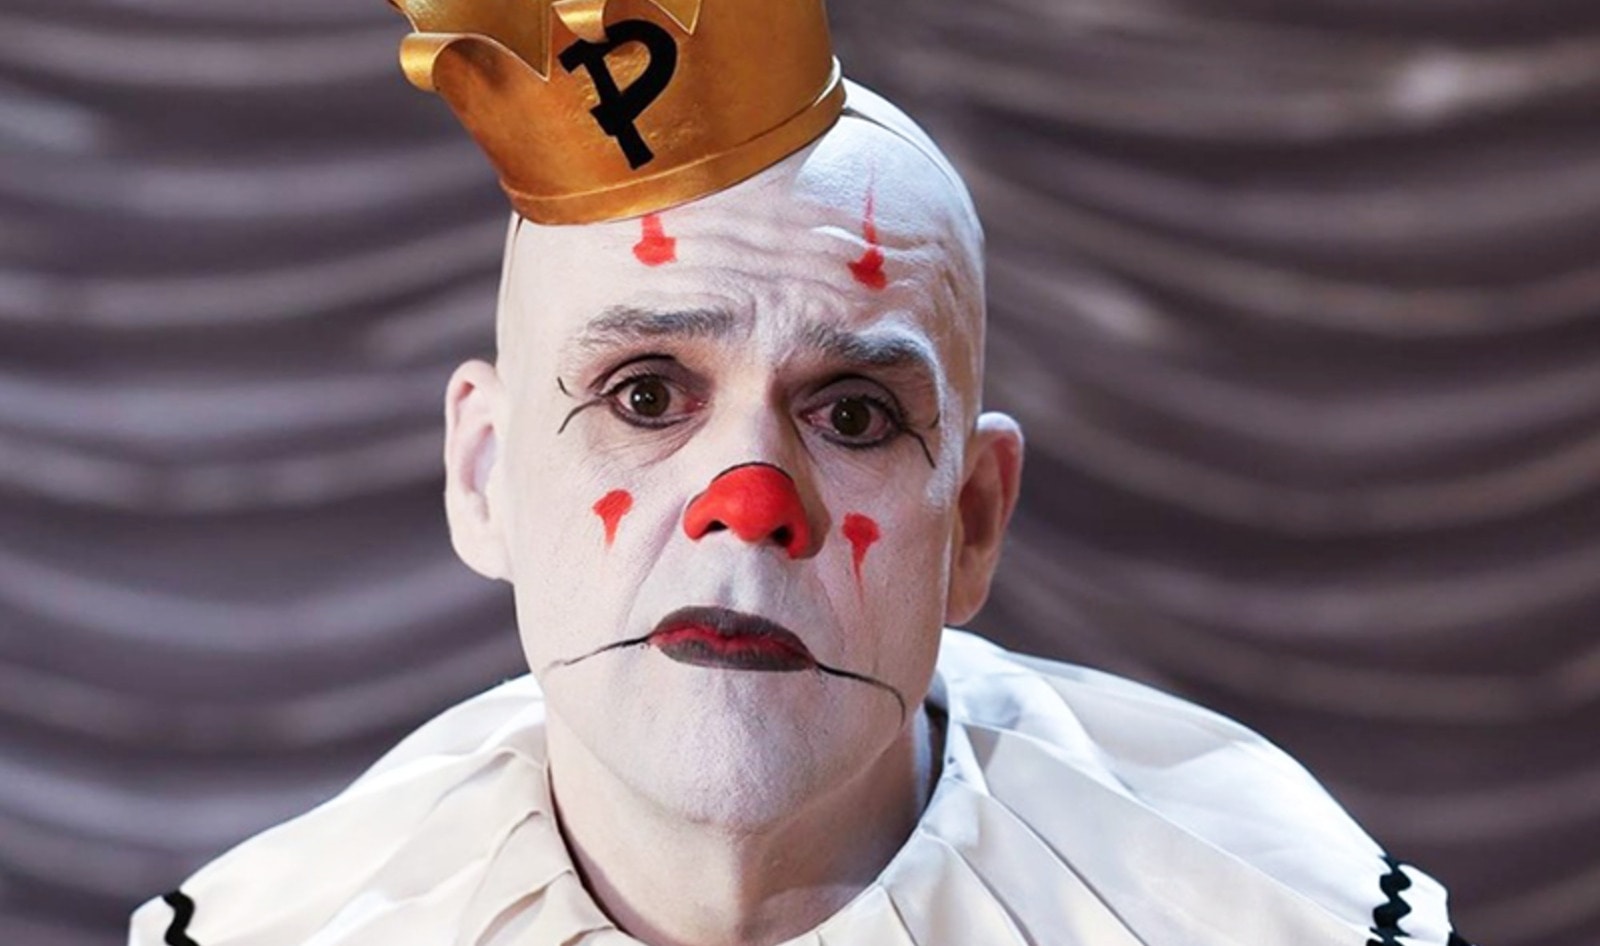 “Puddles Pity Party”—the Sad, 7-Foot Tall, Singing Clown—is Vegan